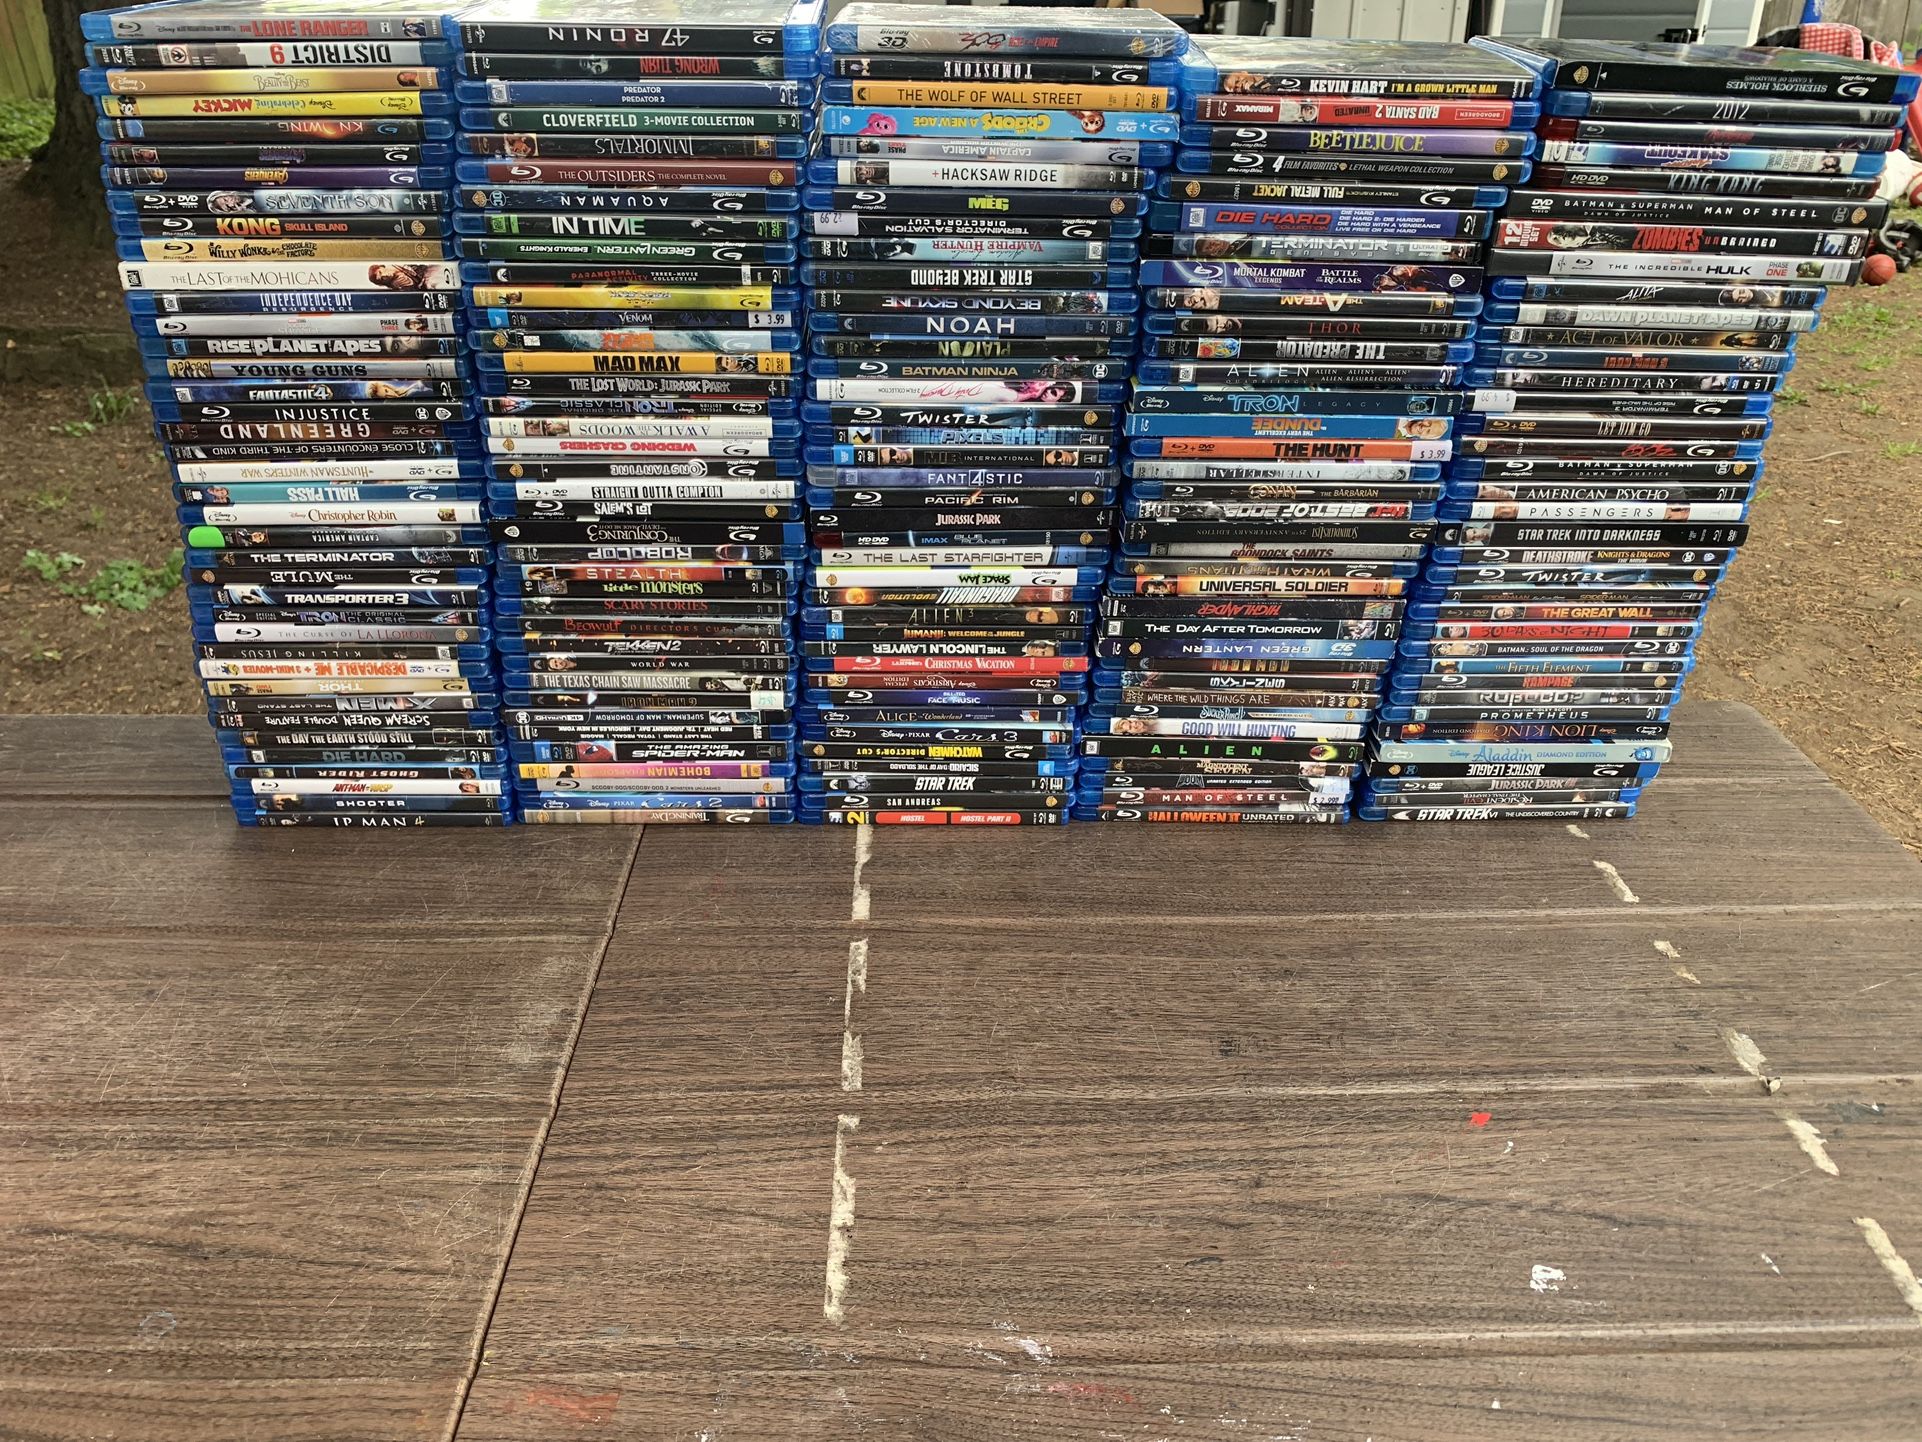 About 185 blu ray dvds $2 Each Or $250 For The Entire Lot!